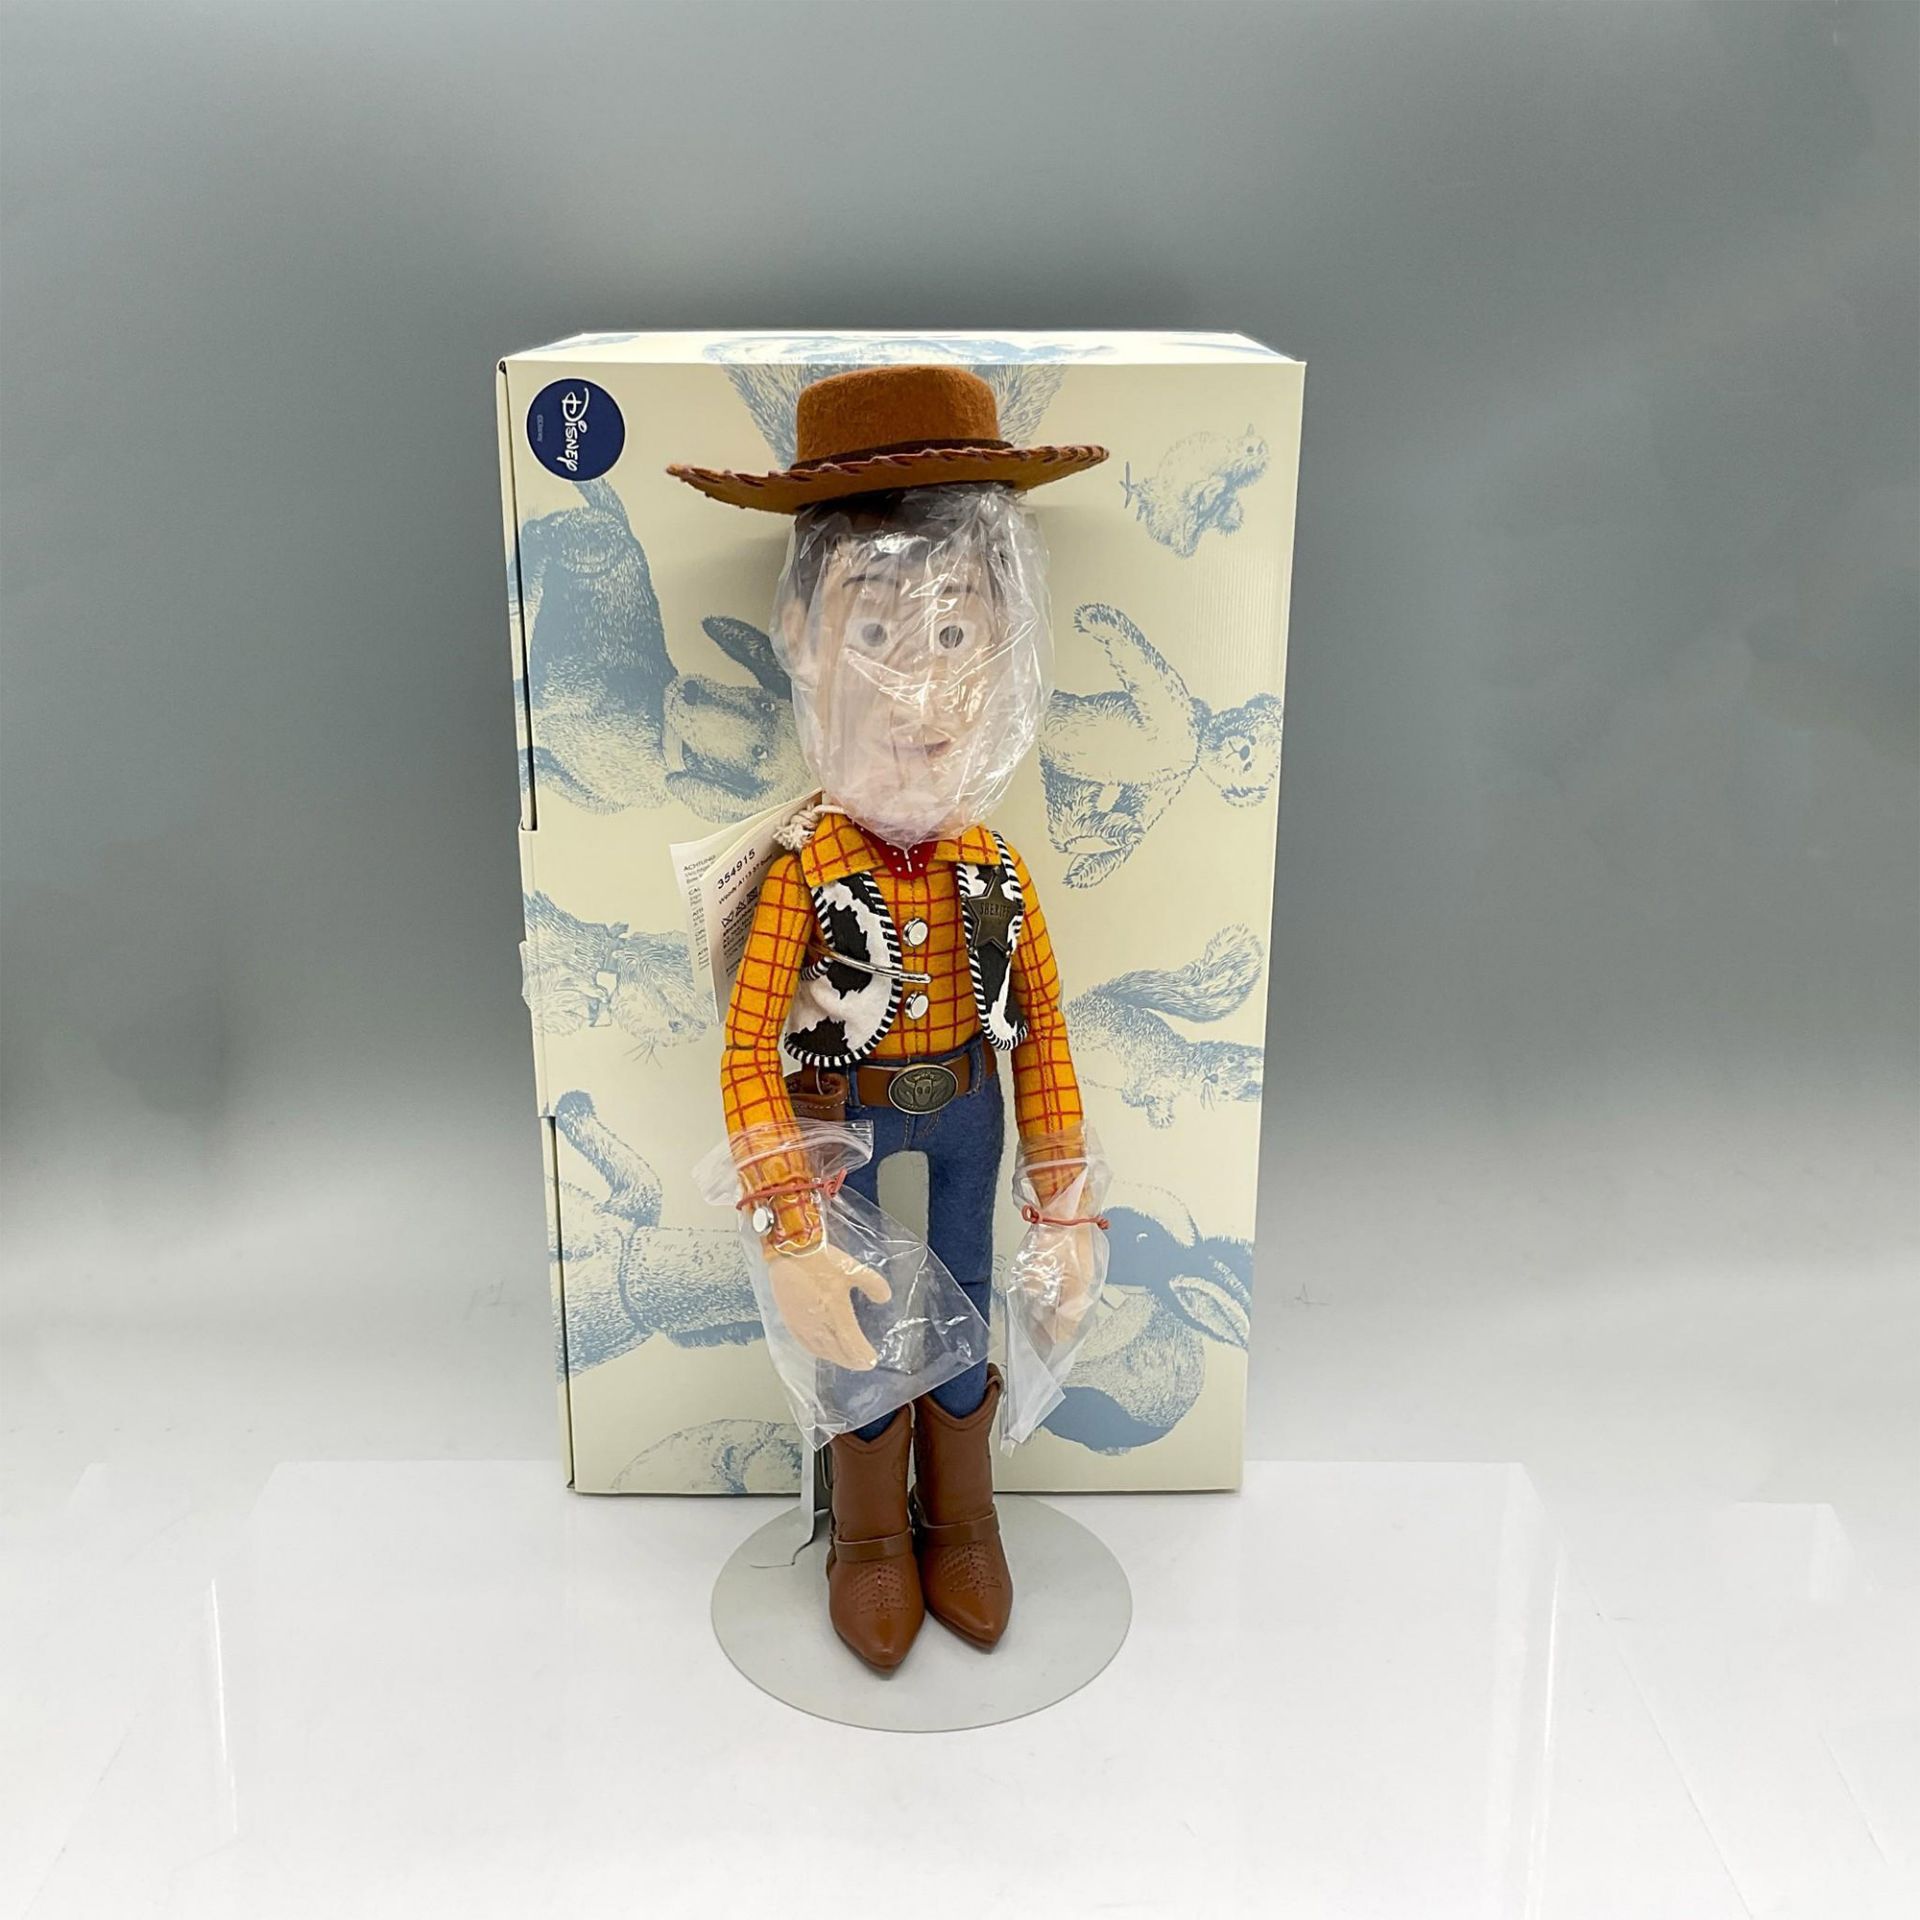 Steiff Character, Woody from Disney/Pixar's Toy Story - Image 3 of 3